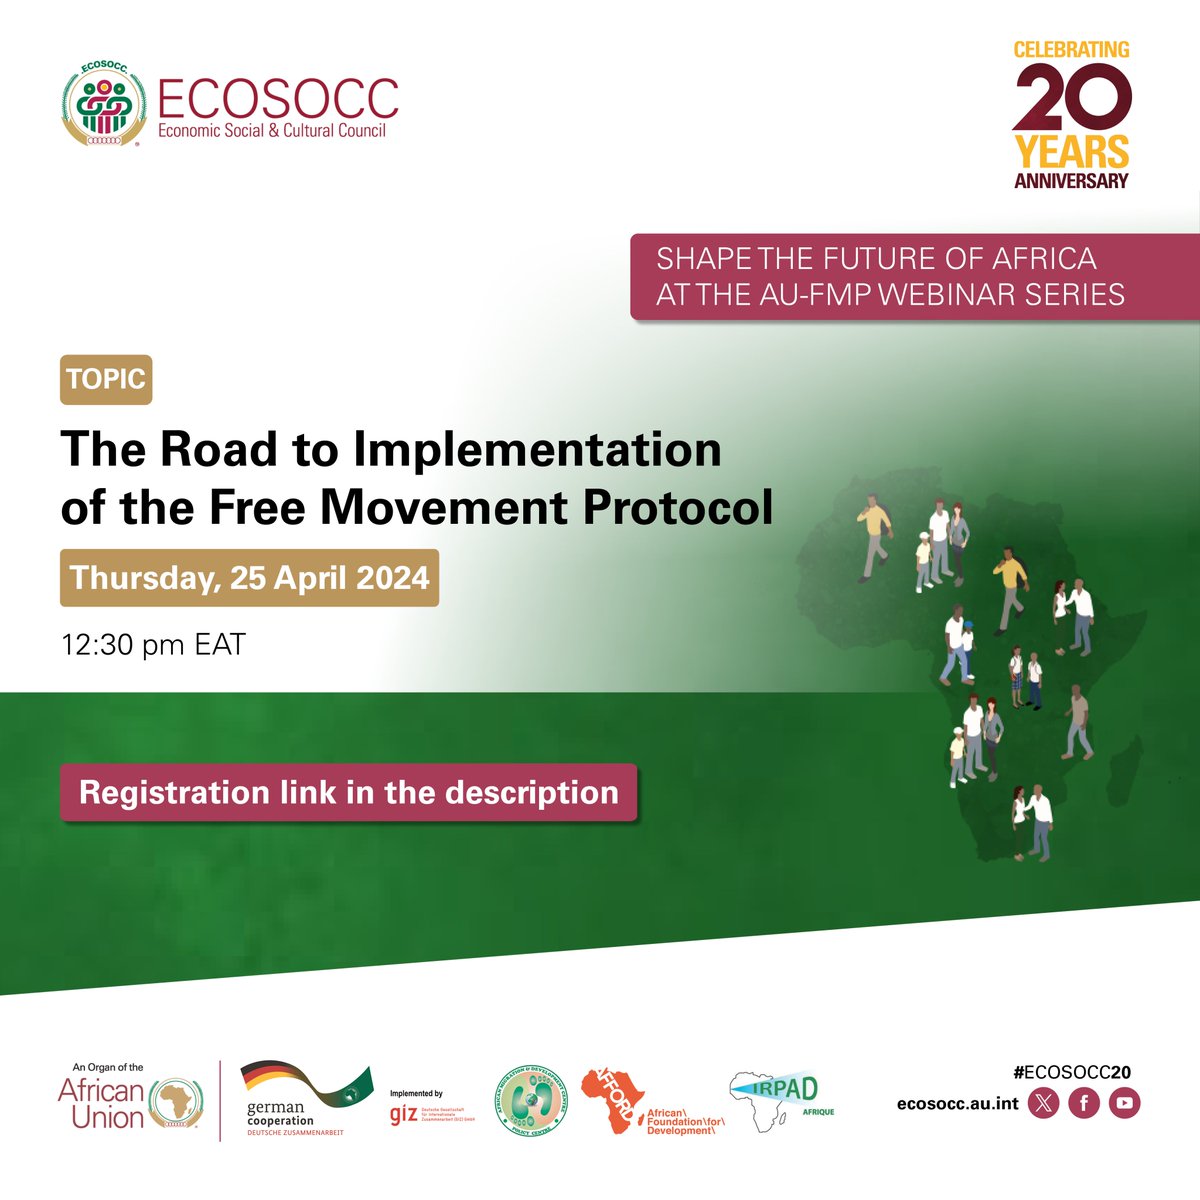 ECOSOCC, GIZ Wrap-up Webinar Series on AU Free Movement Protocol The African Union Economic, Social and Cultural Council (ECOSOCC) and the Deutsche Gesellschaft für Internationale Zusammenarbeit (GIZ) recently concluded their year-long webinar series aimed at demystifying the